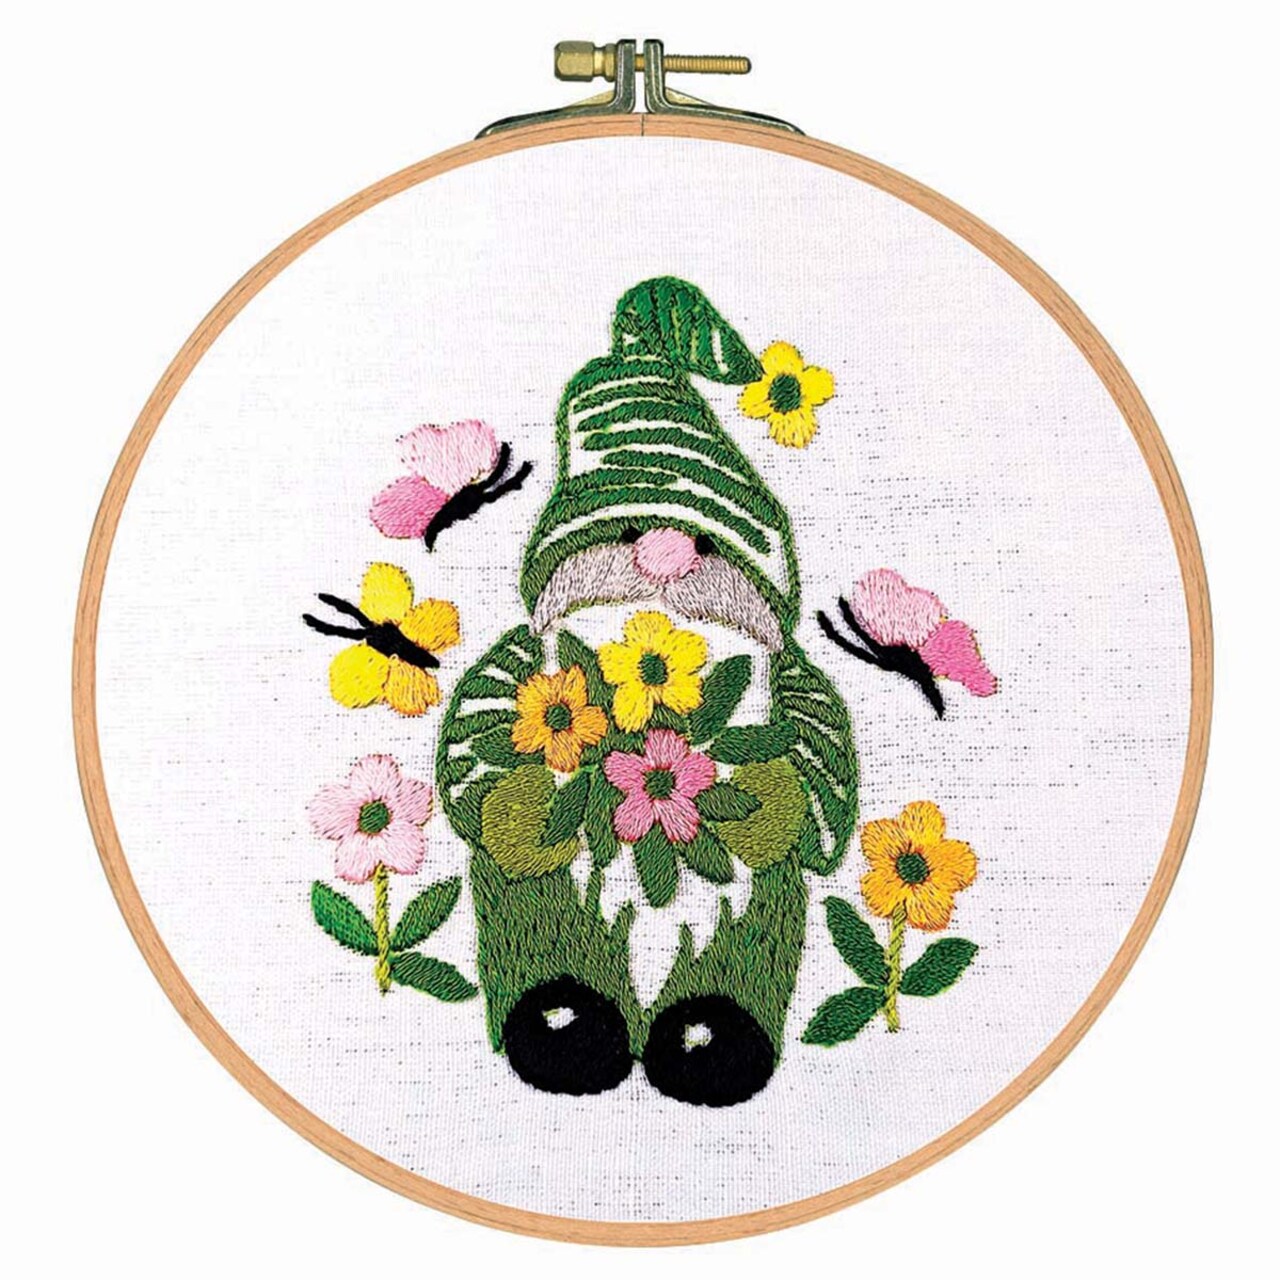 Craftways Green Gnome with Butterflies Hoop Stamped Embroidery Kit